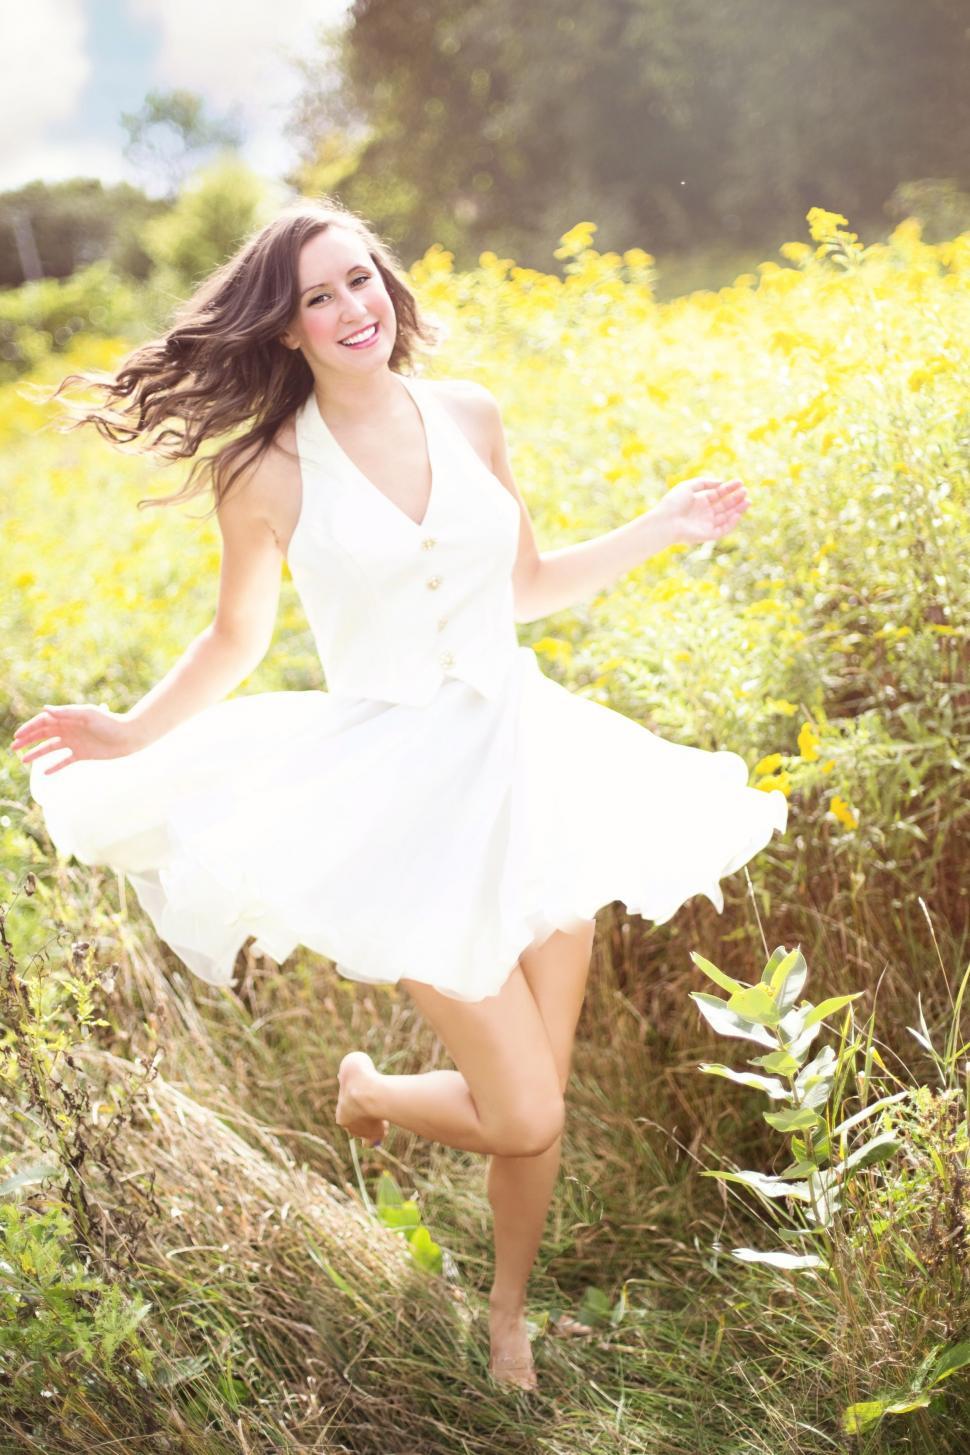 Free Image of Woman with brunette hair dancing in the wildflower field - looking at camera 